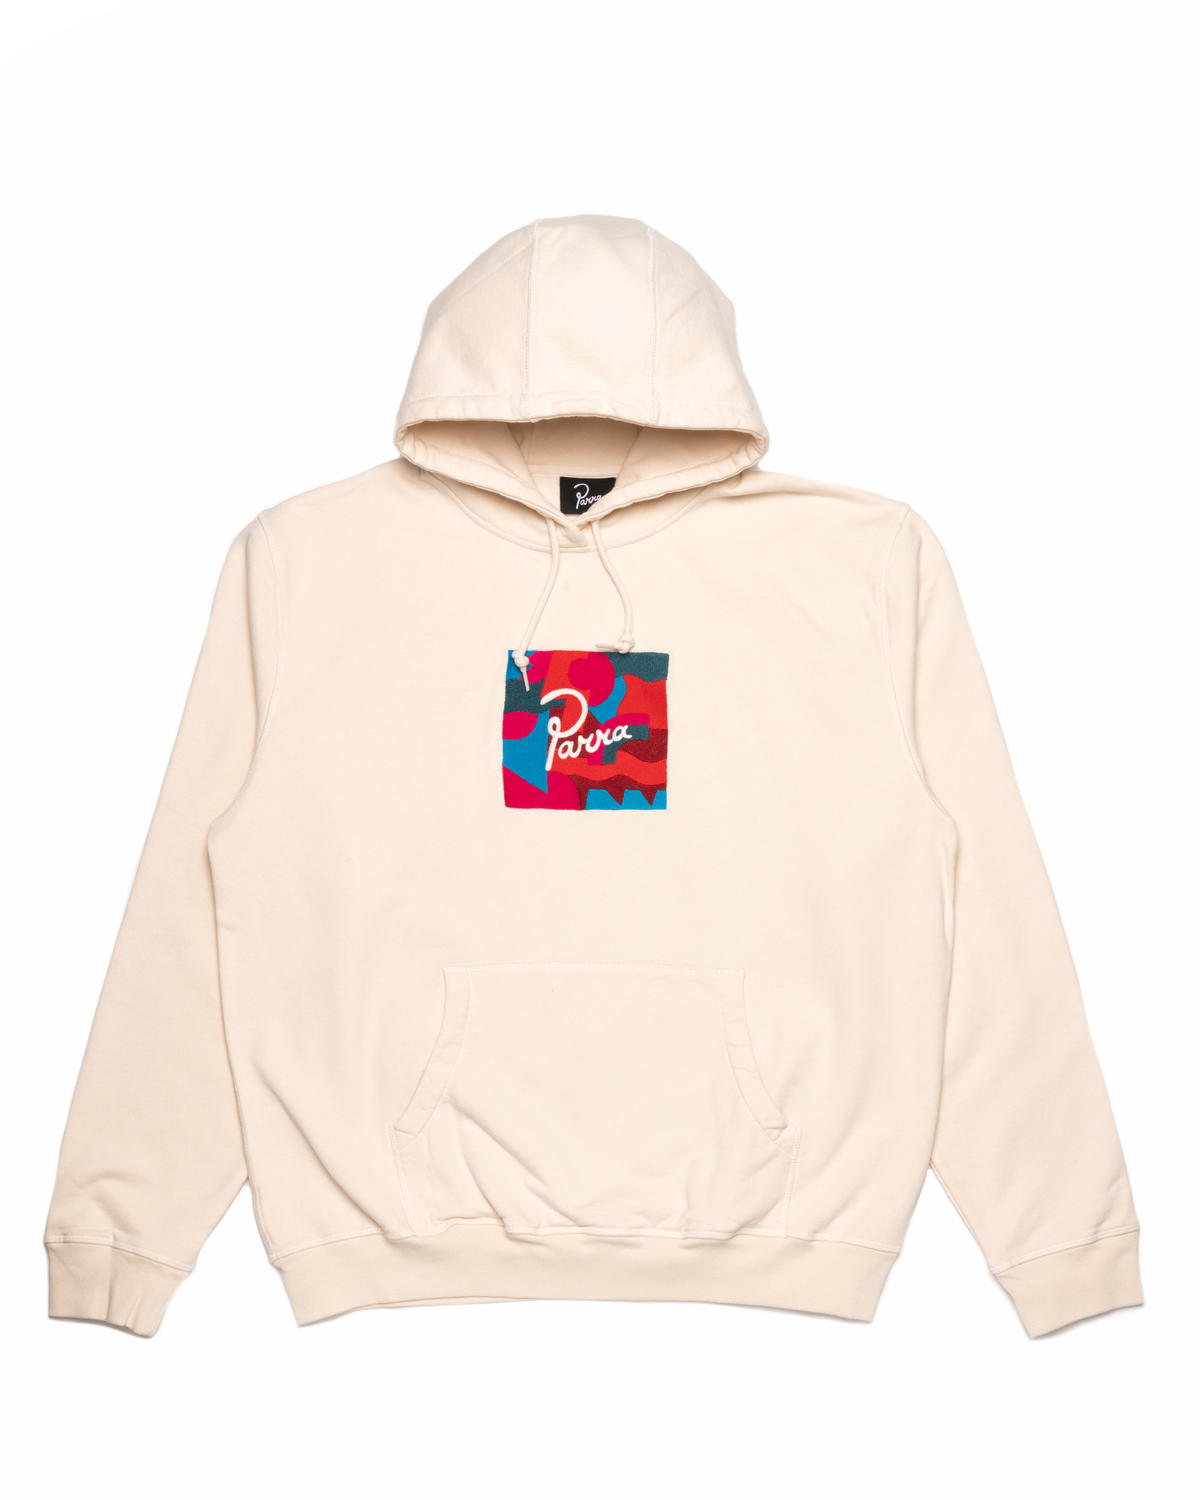 by Parra abstract shapes hooded sweatshirt | 47425 | AFEW STORE